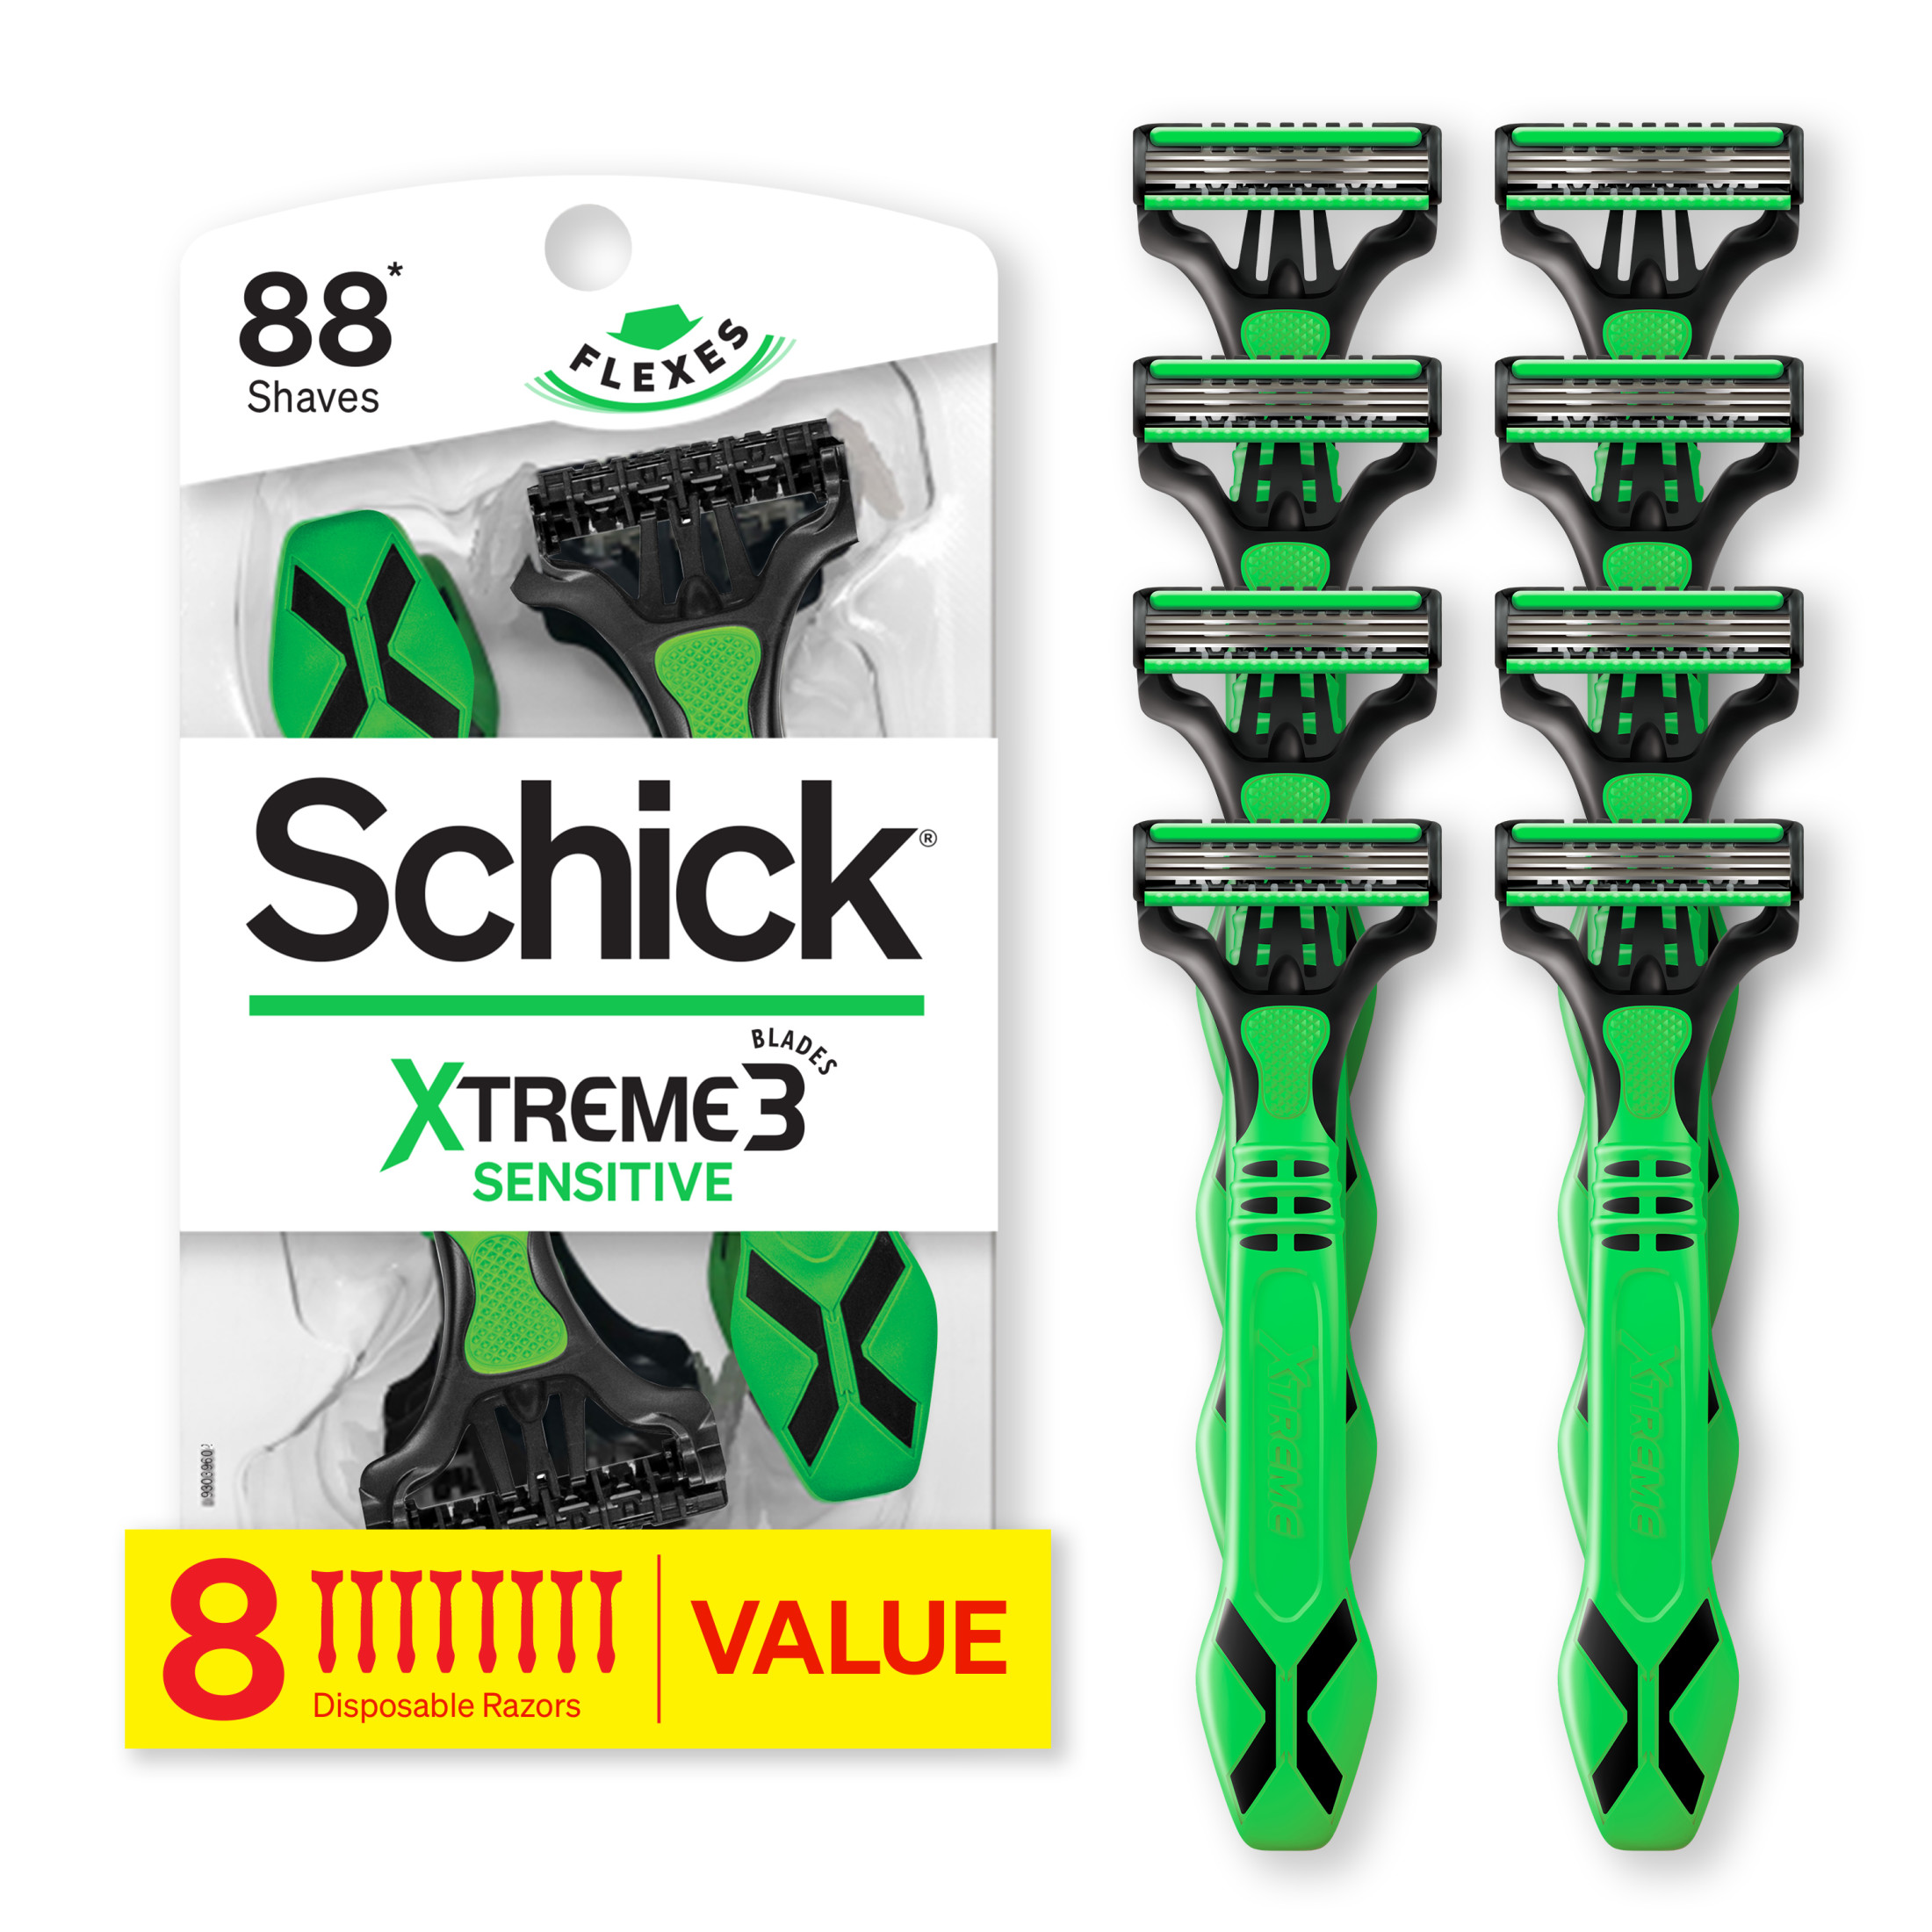 Schick Xtreme 3 Blade Disposable Razors for Men, 8 ct, Men's Sensitive Skin Razor Pack, Protects Skin from Irritation - image 1 of 11